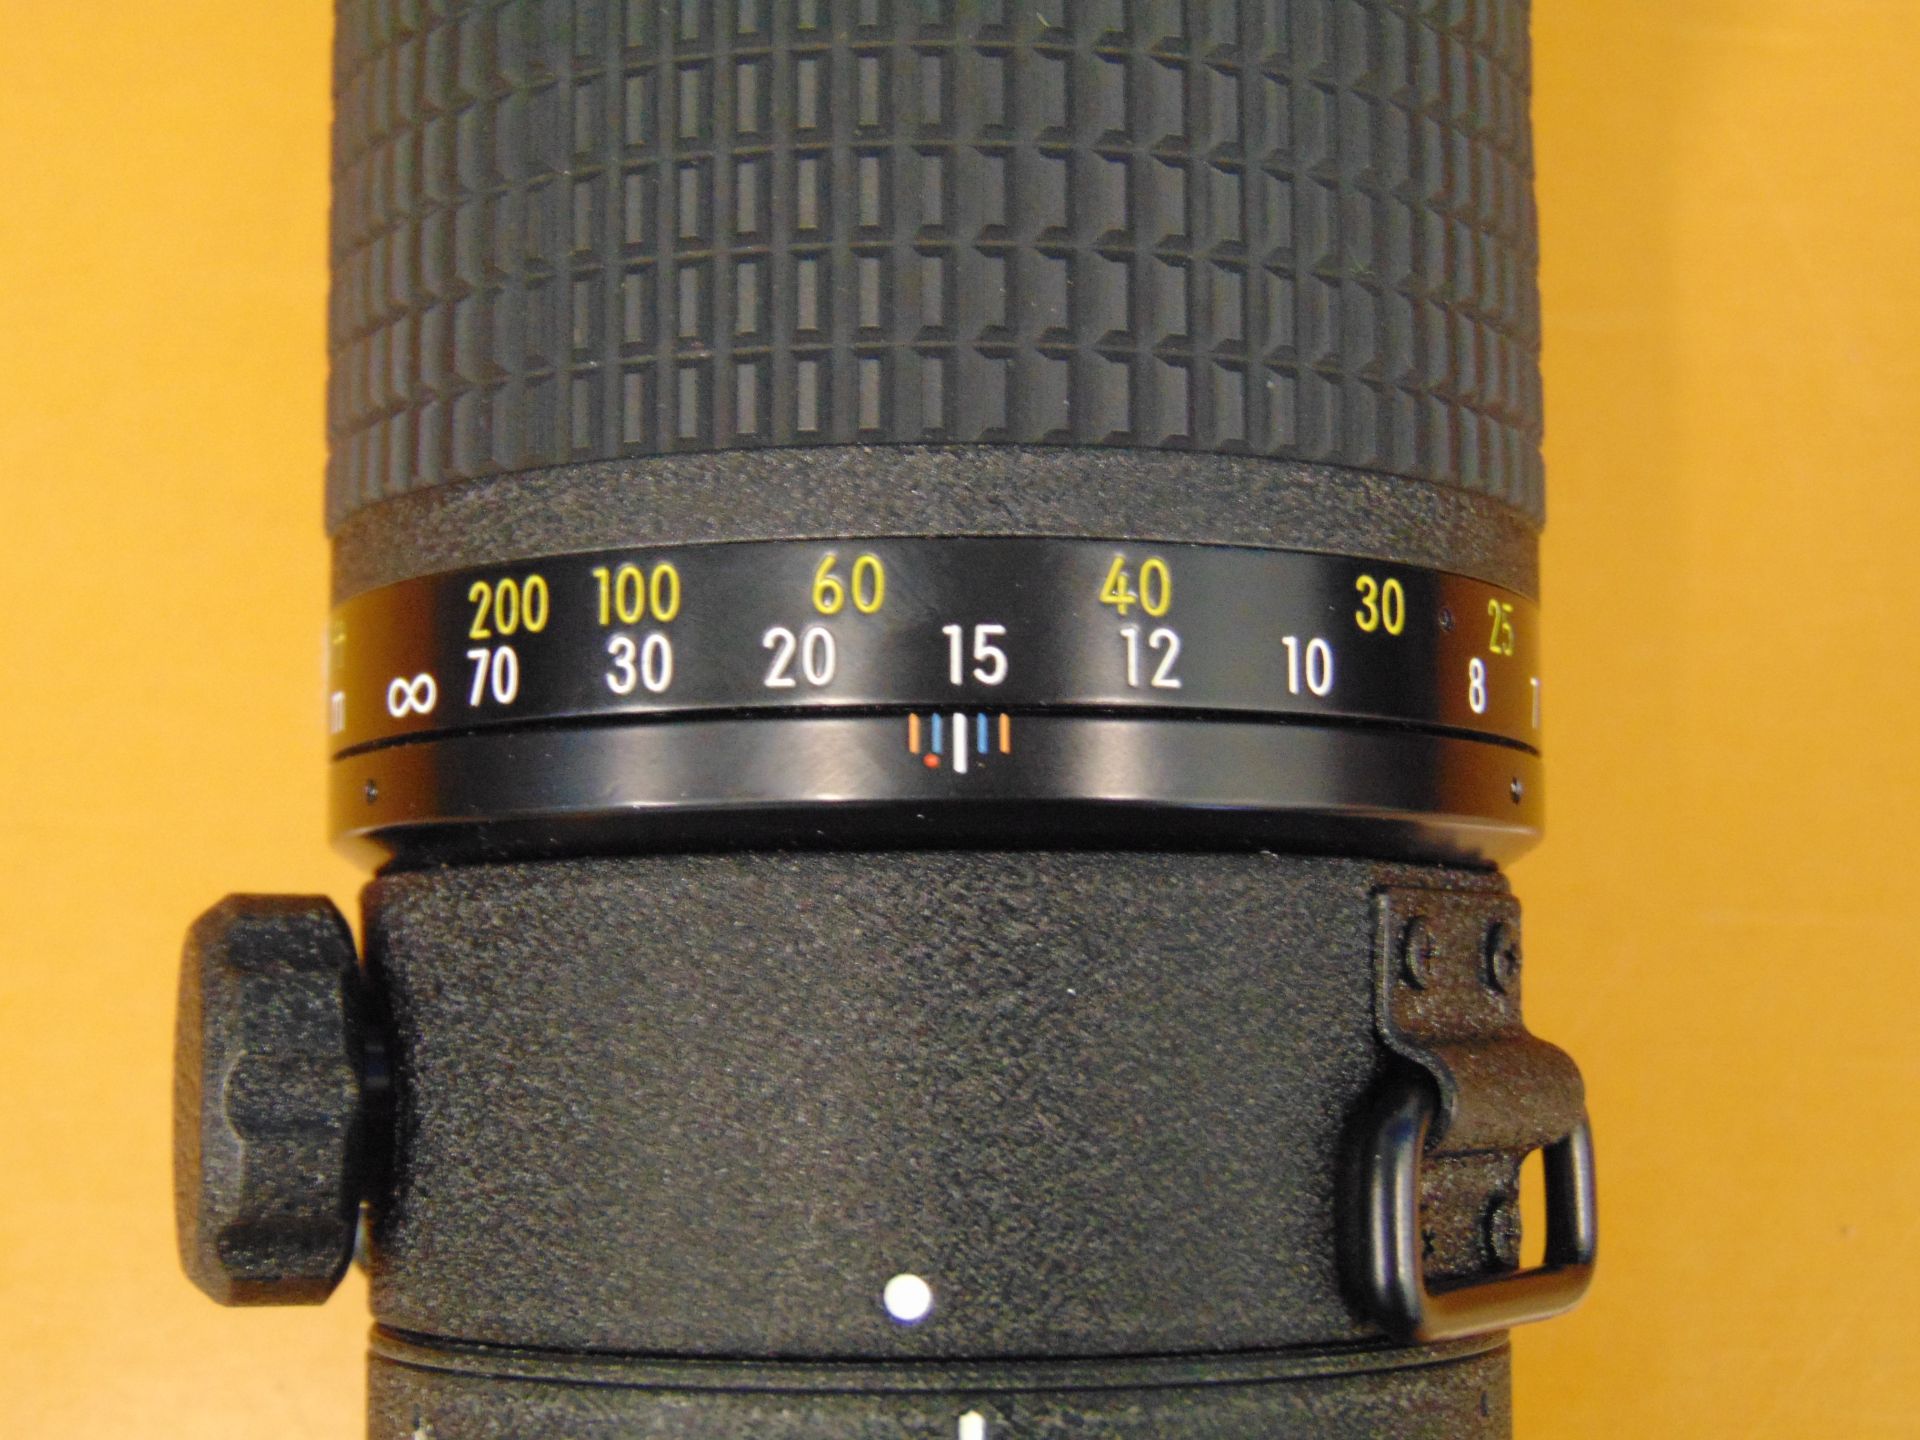 Nikon Nikkor ED 400mm 1:3.5 Lense with Leather Carry Case - Image 7 of 11